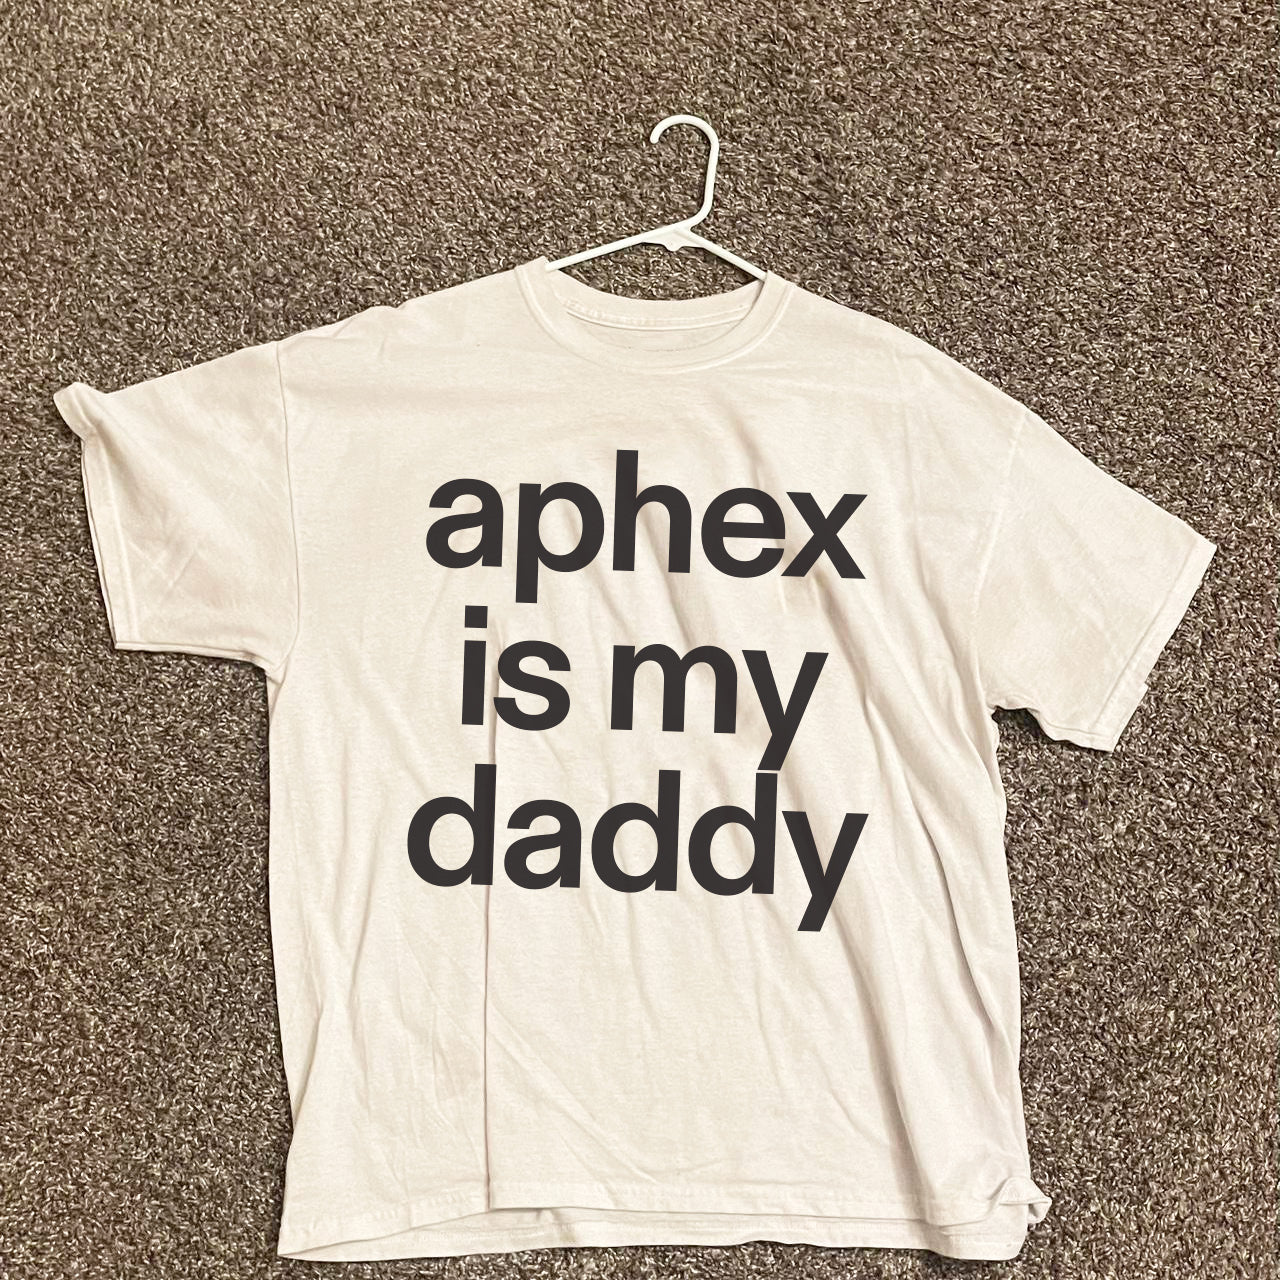 APHEX IS MY DADDY® Unisex T-Shirt